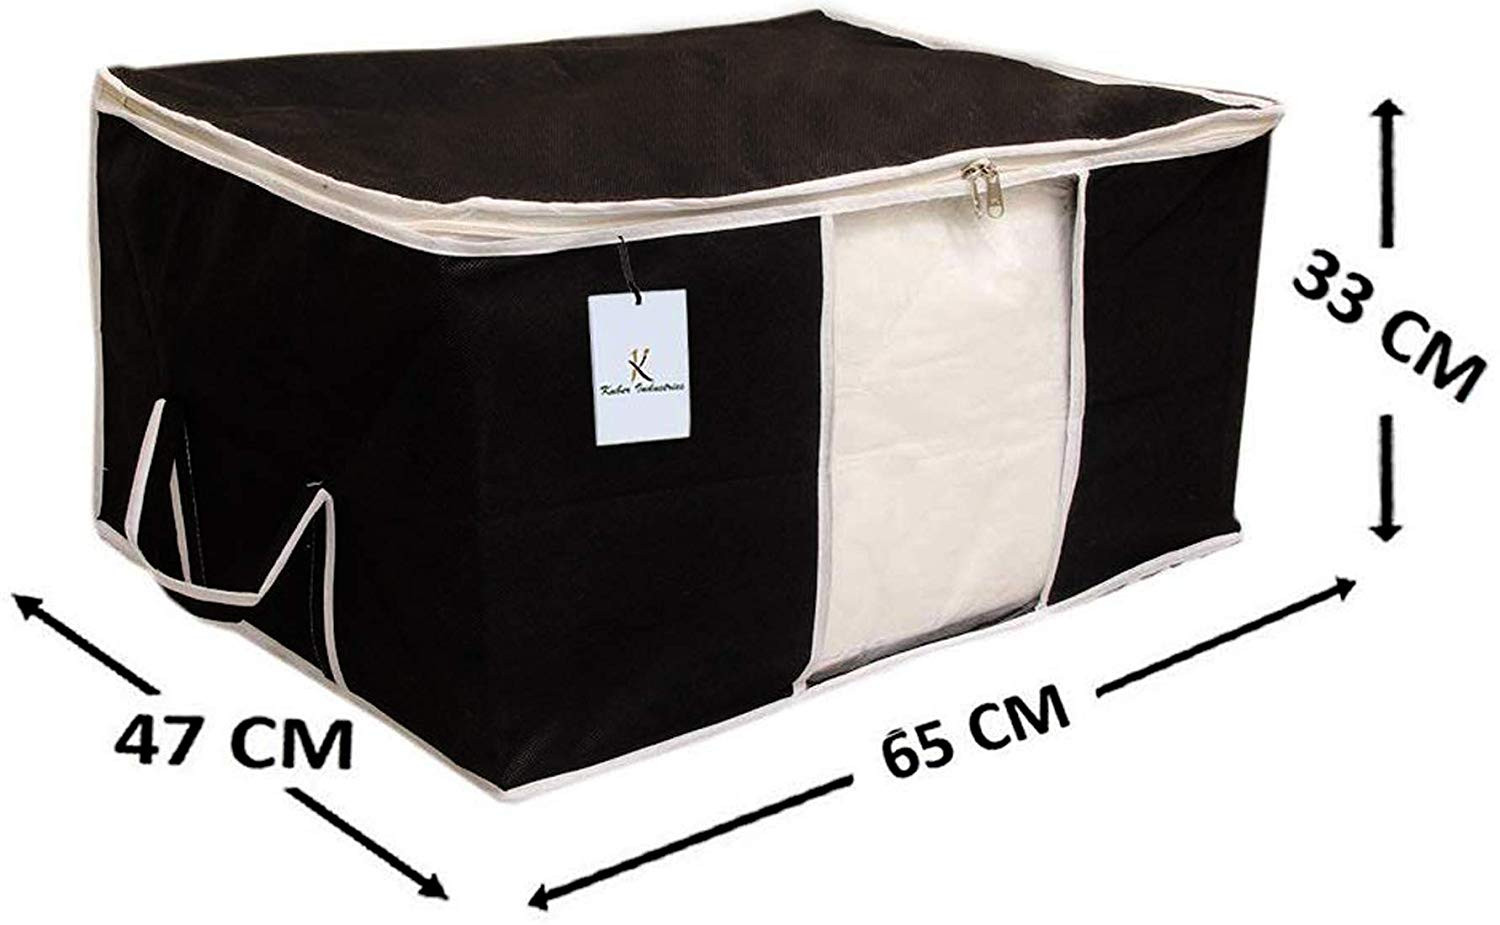 Kuber Industries Non Woven Saree Cover And Underbed Storage Bag, Cloth Organizer For Storage, Blanket Cover Combo Set (Black) -CTKTC38463